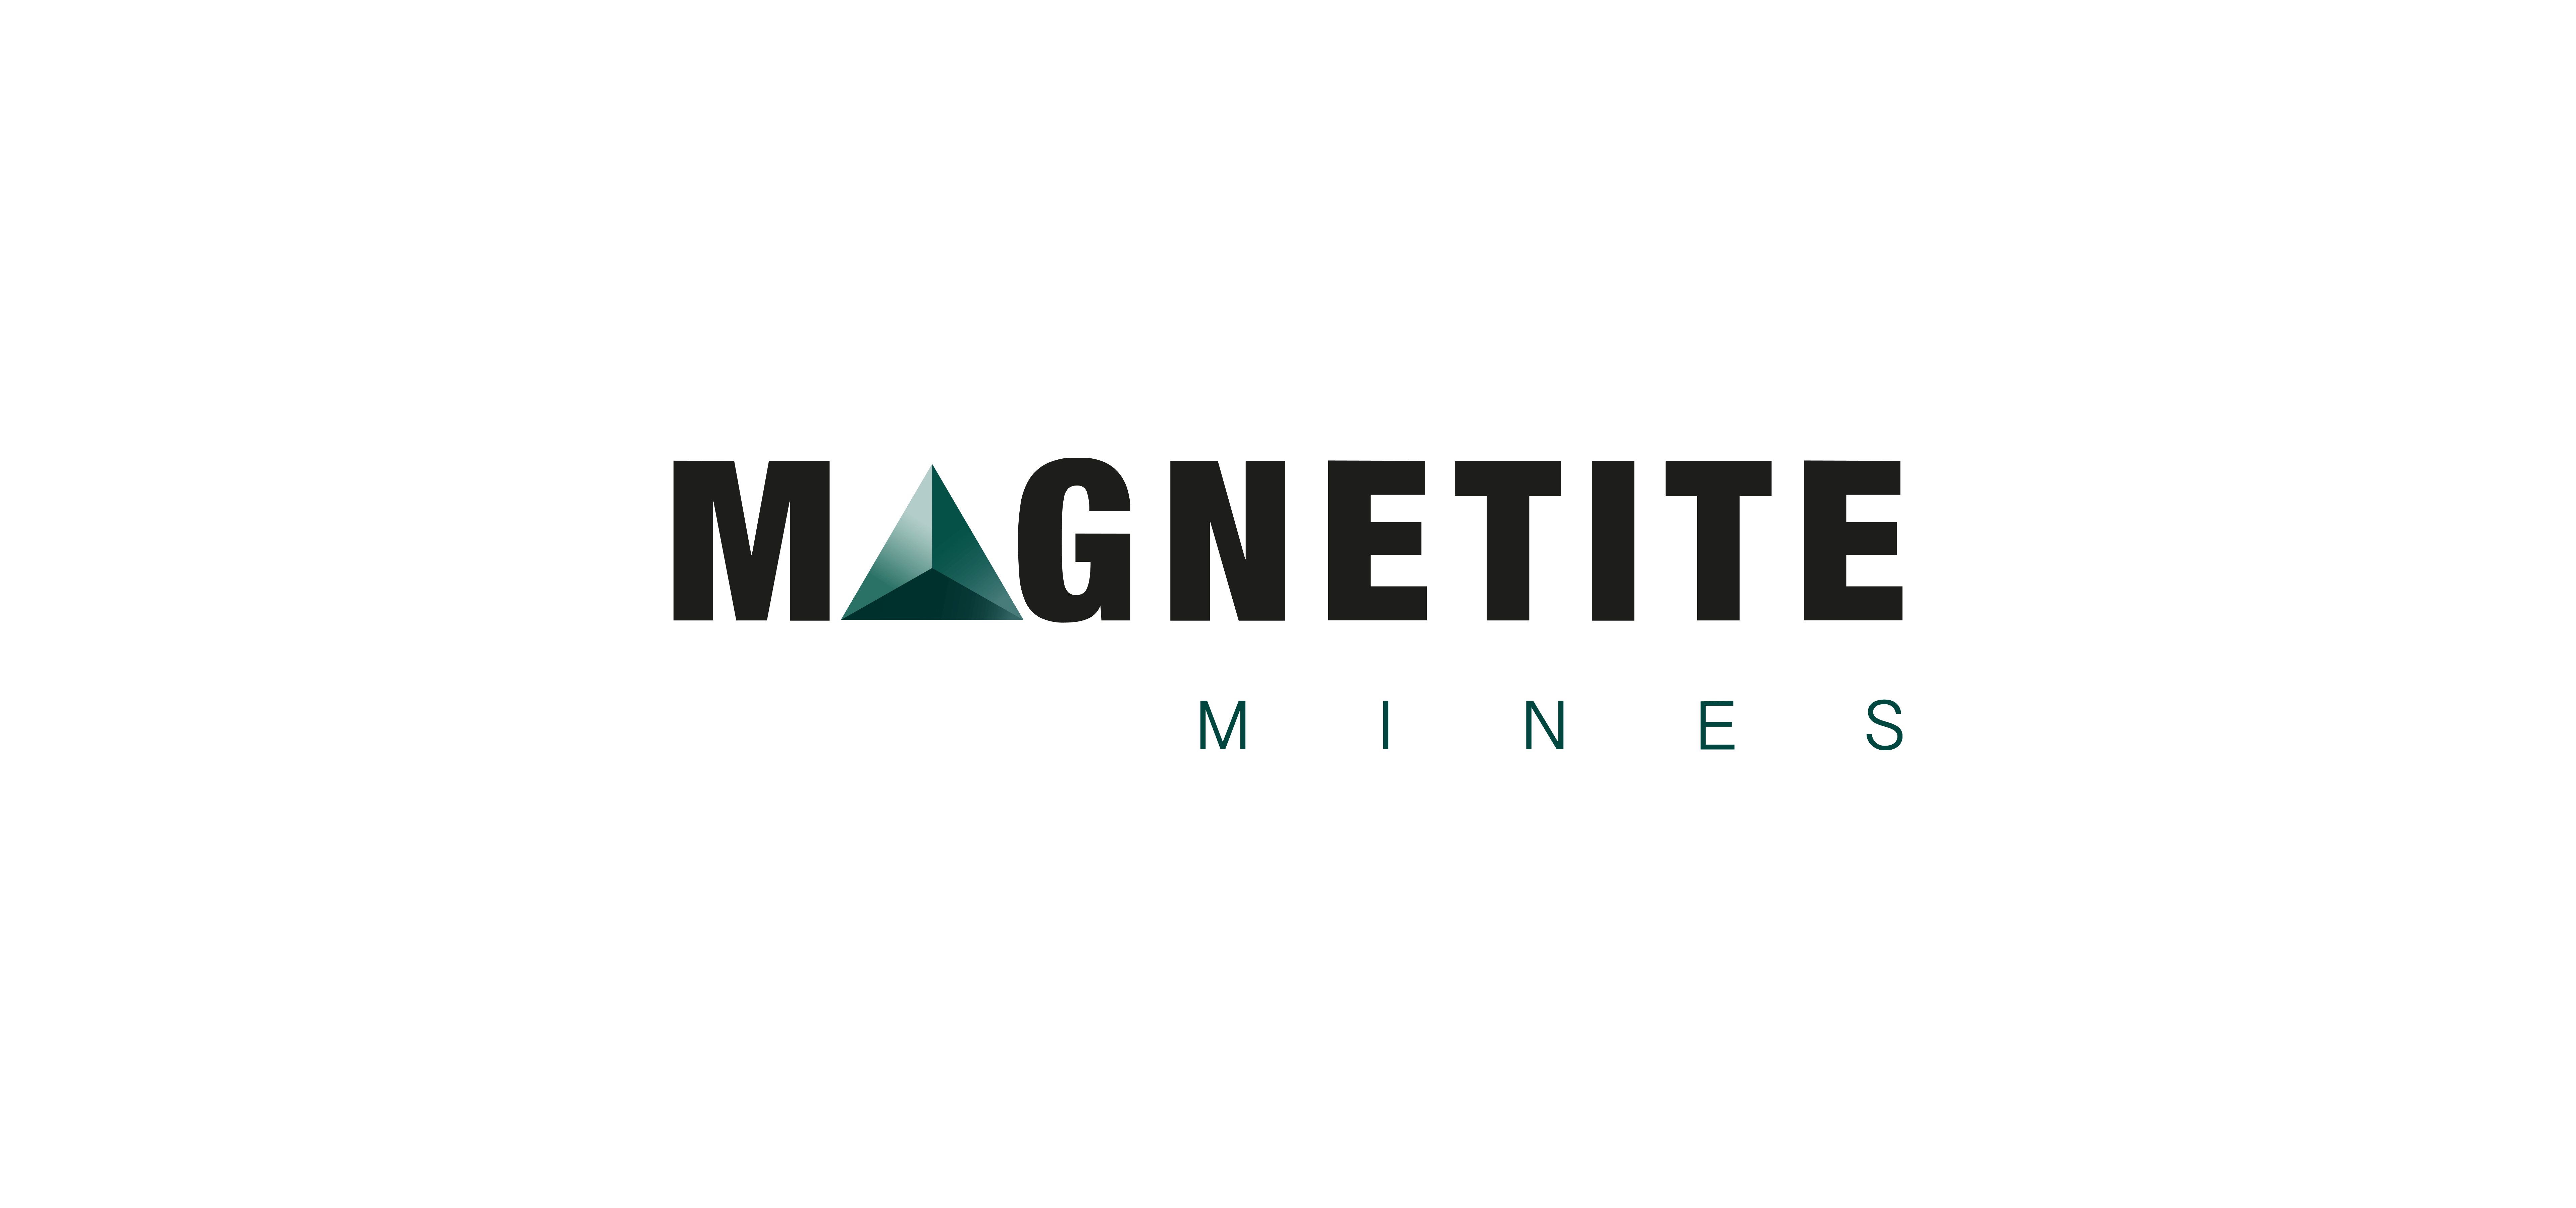 Proactive Investors: Magnetite Mines inks MoU for Razorback Iron Ore Project development and financing partnership